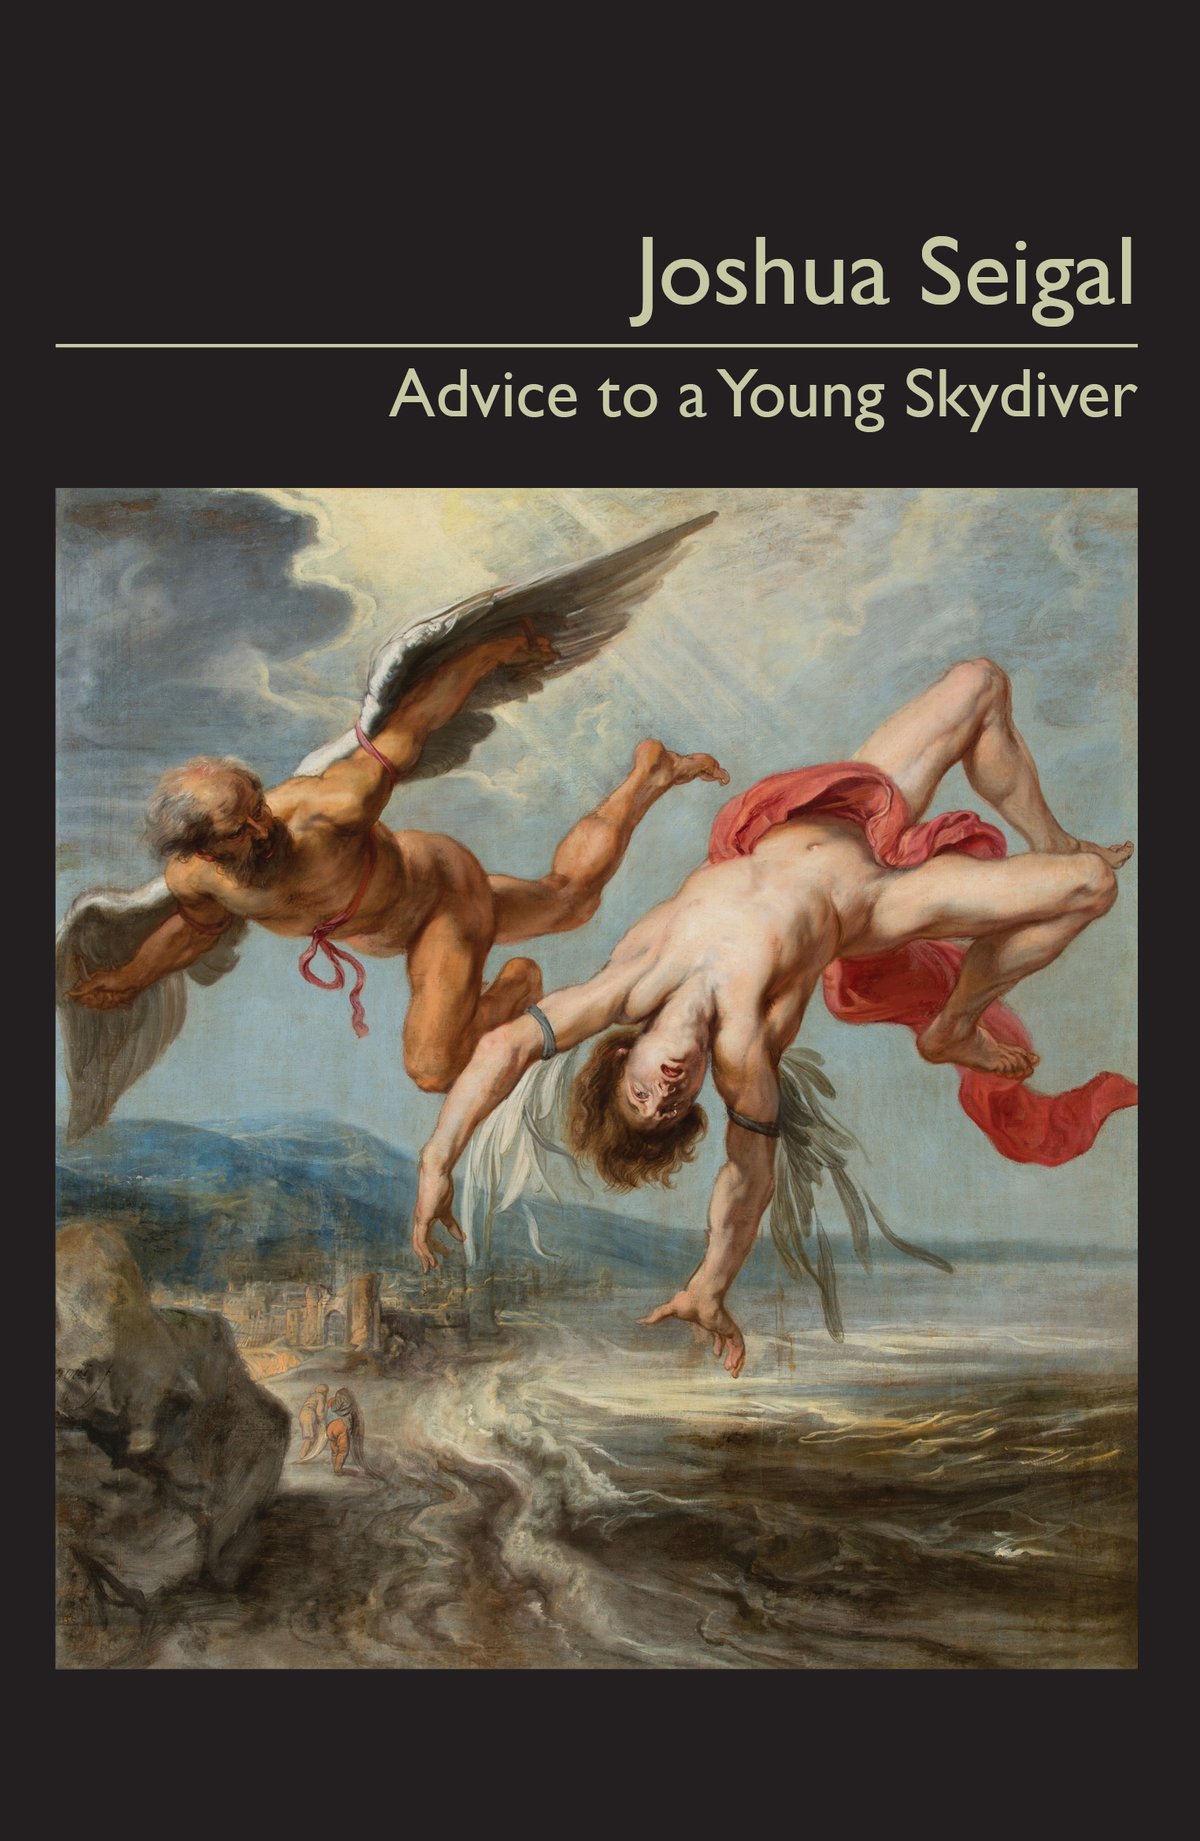 Image of Advice to a Young Skydiver by Joshua Seigal